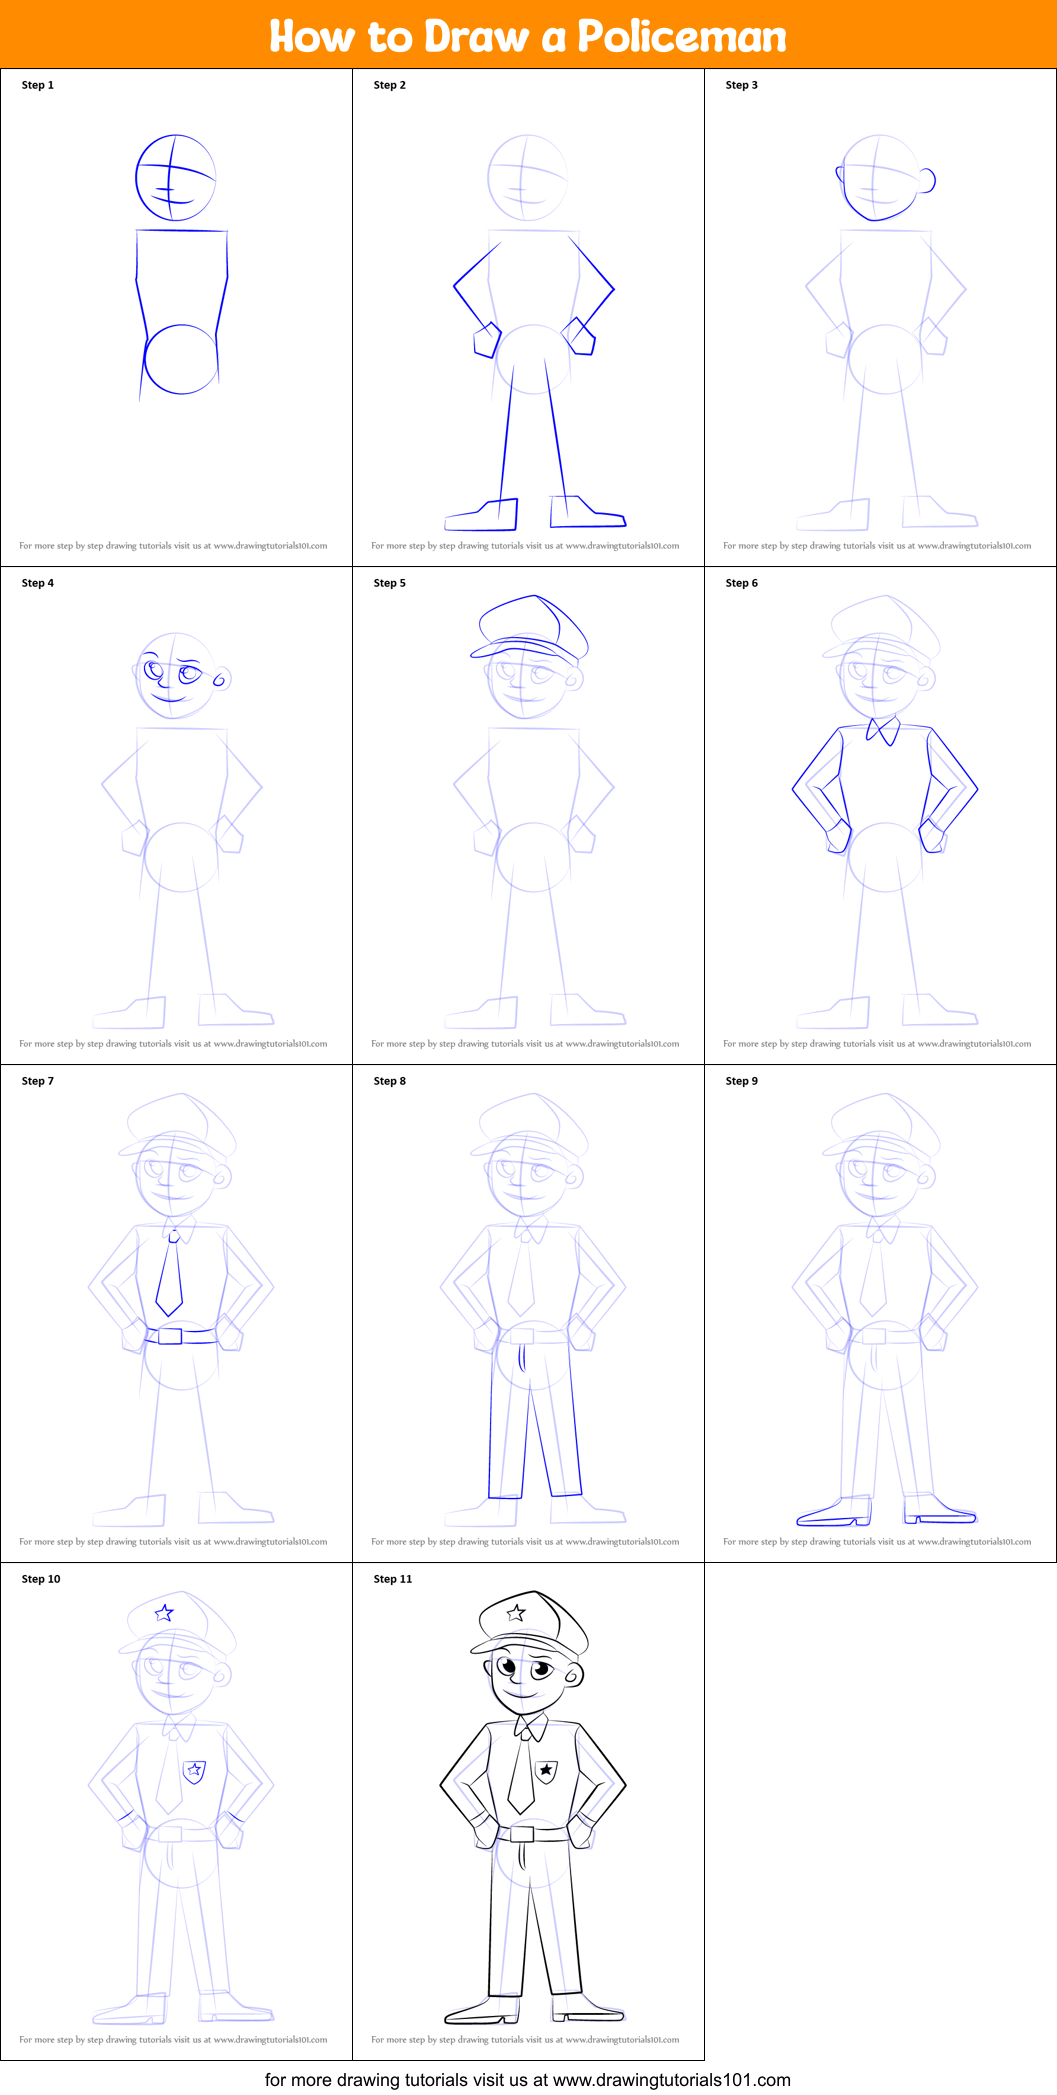 How to Draw a Policeman printable step by step drawing